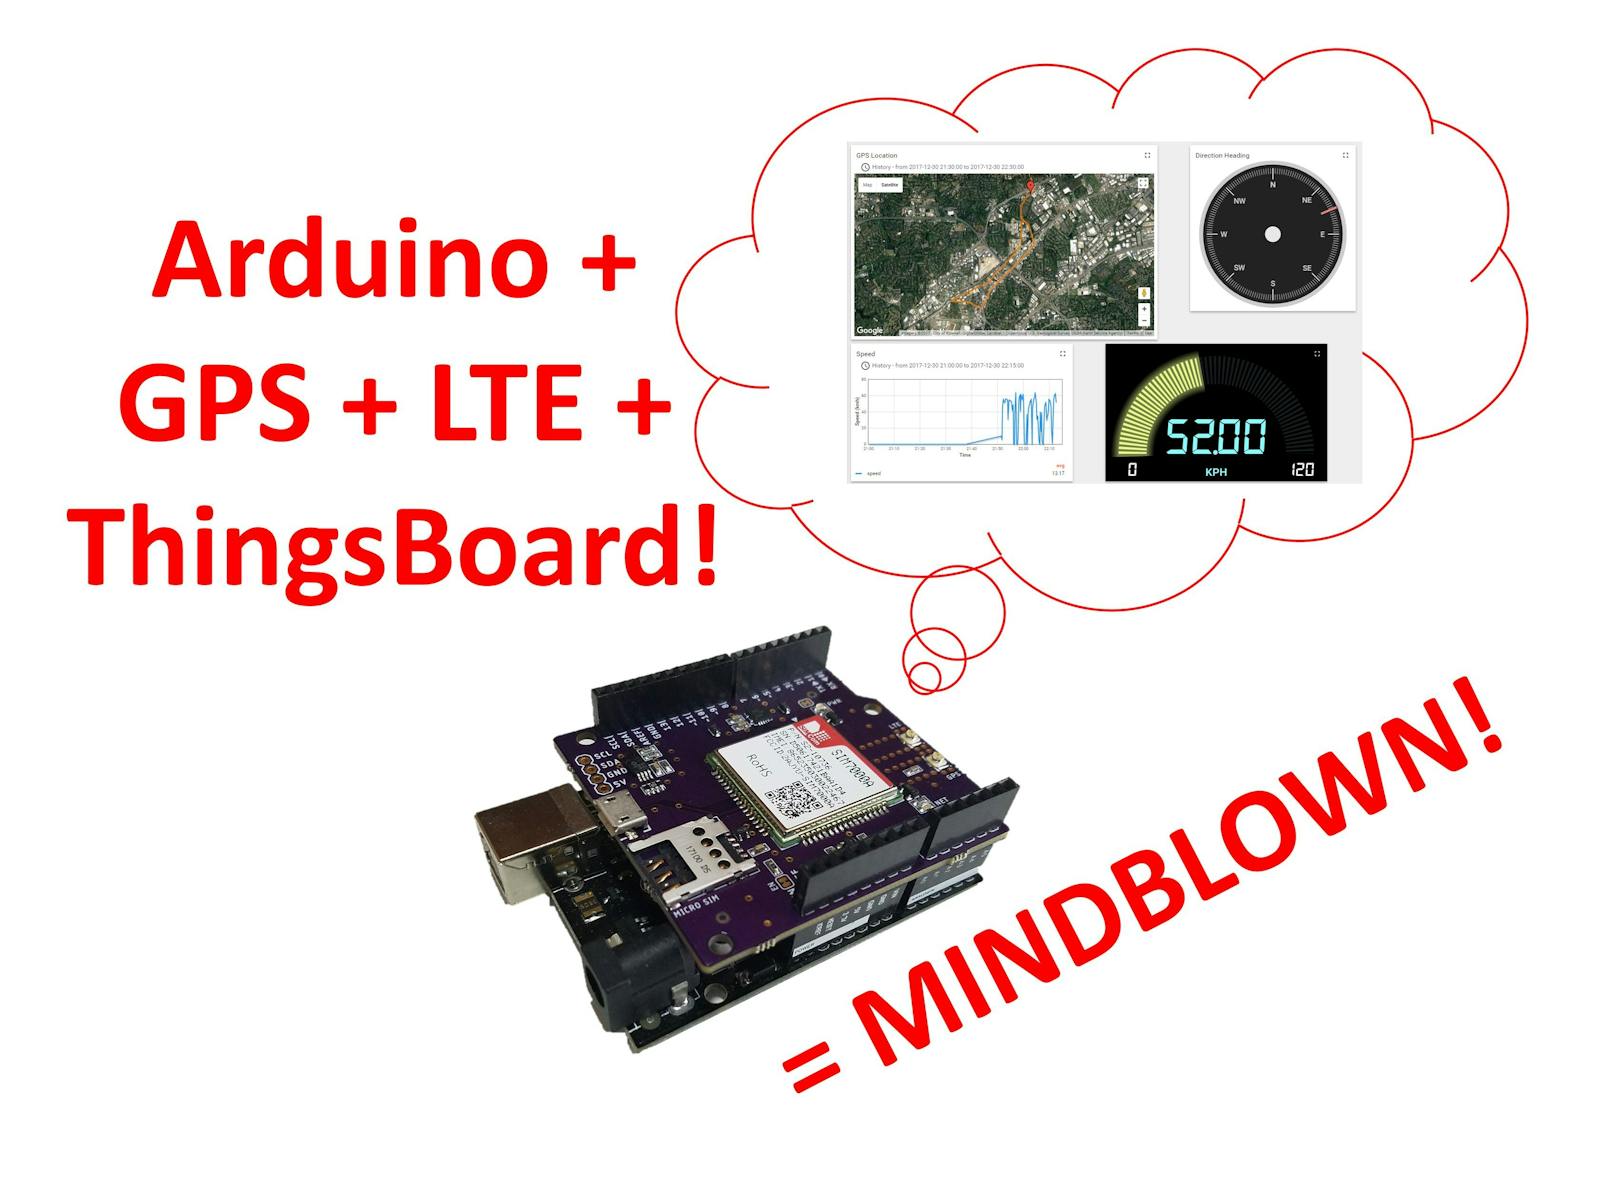 klud Serena beskytte Real-Time 2G/3G/LTE Arduino GPS Tracker + IoT Dashboard - Hackster.io